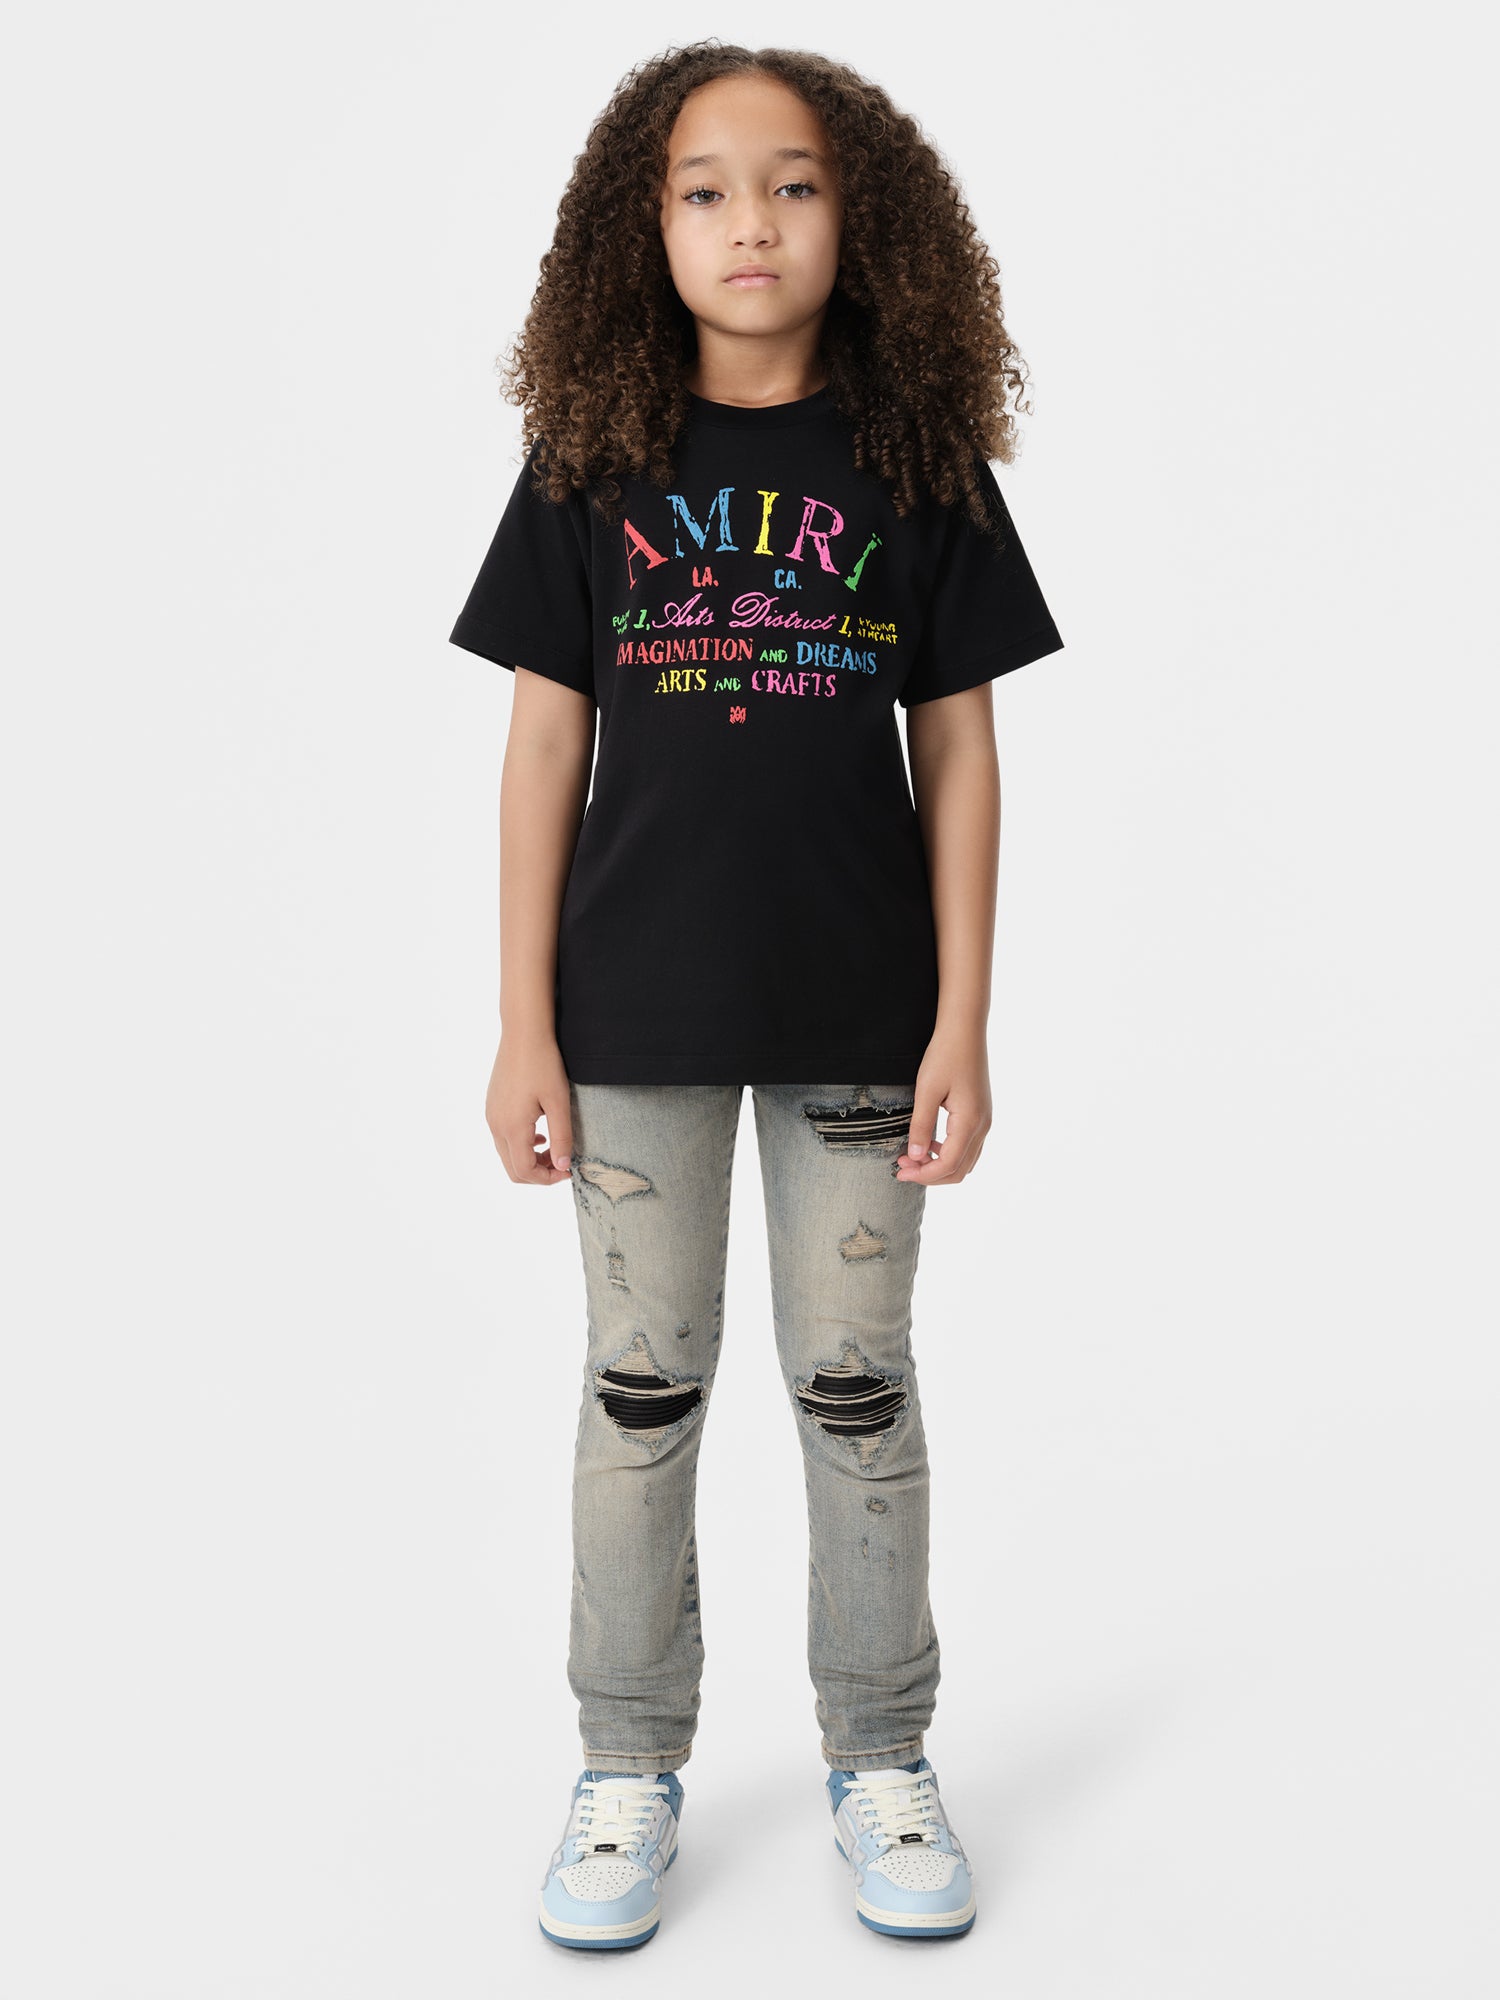 Product KIDS - ARTS DISTRICT SCRIBBLE TEE - Black featured image